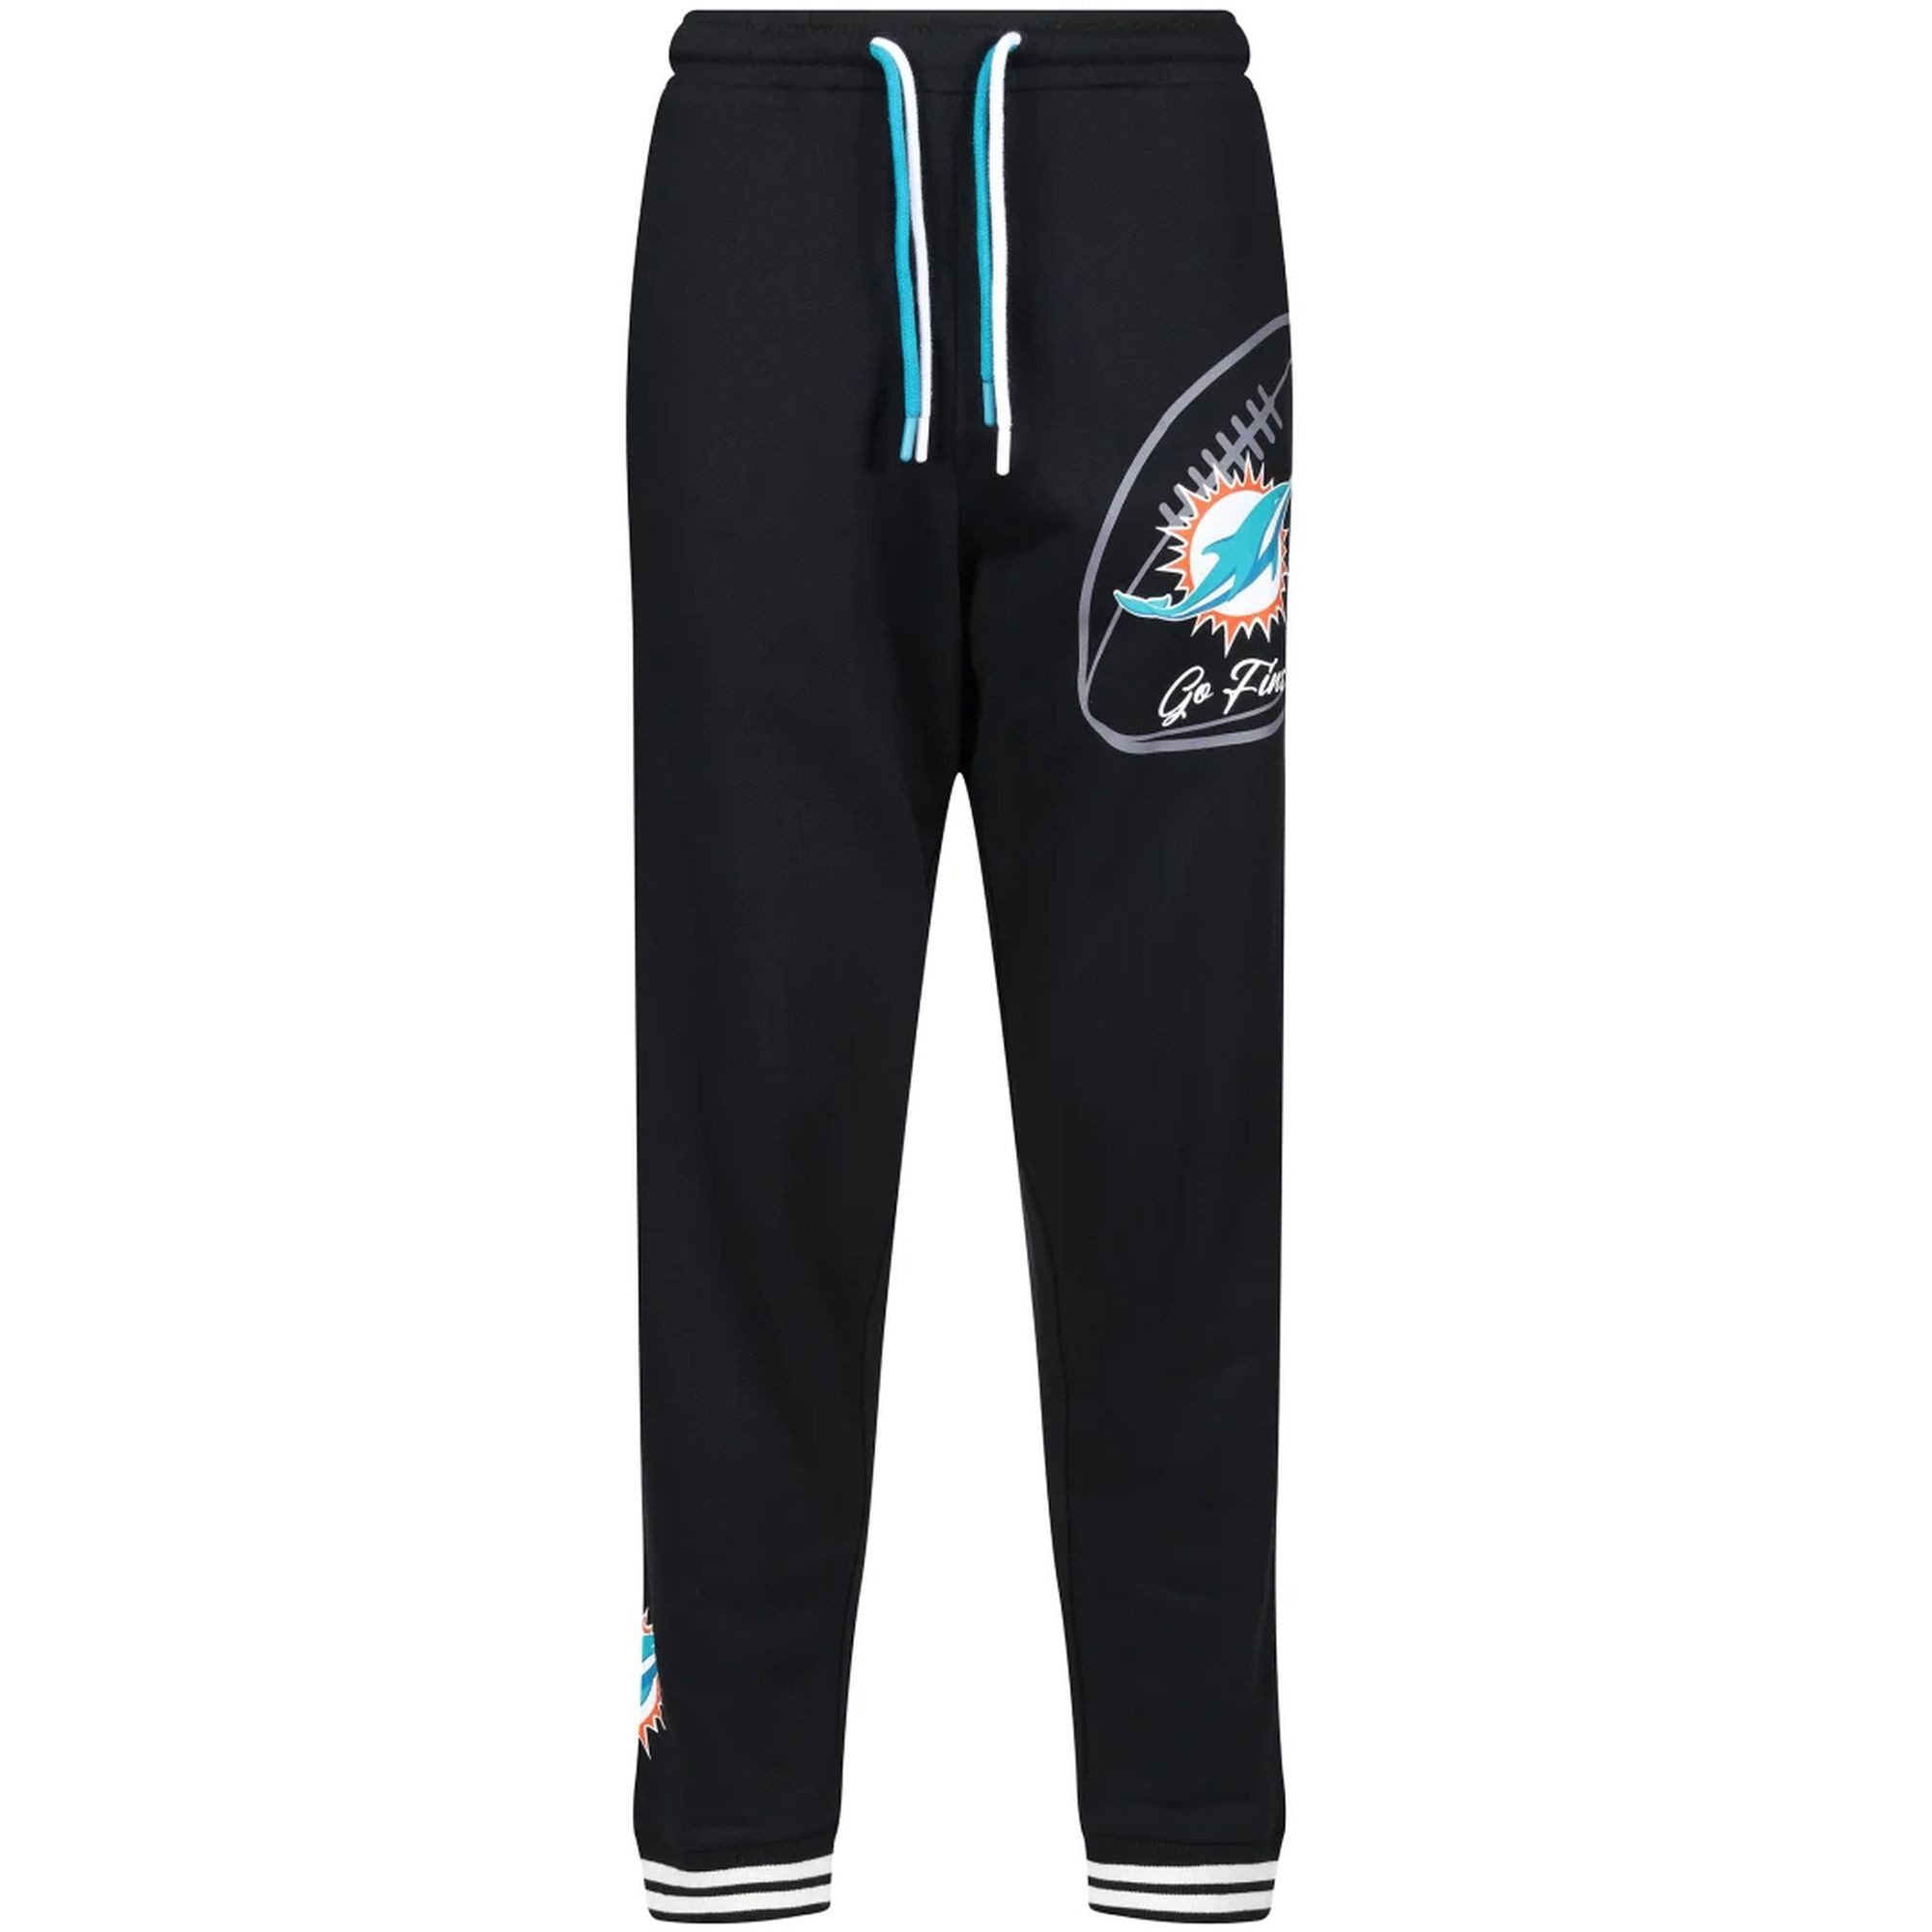 Miami Dolphins - Go Fins - NFL Sweatpants Black Recovered